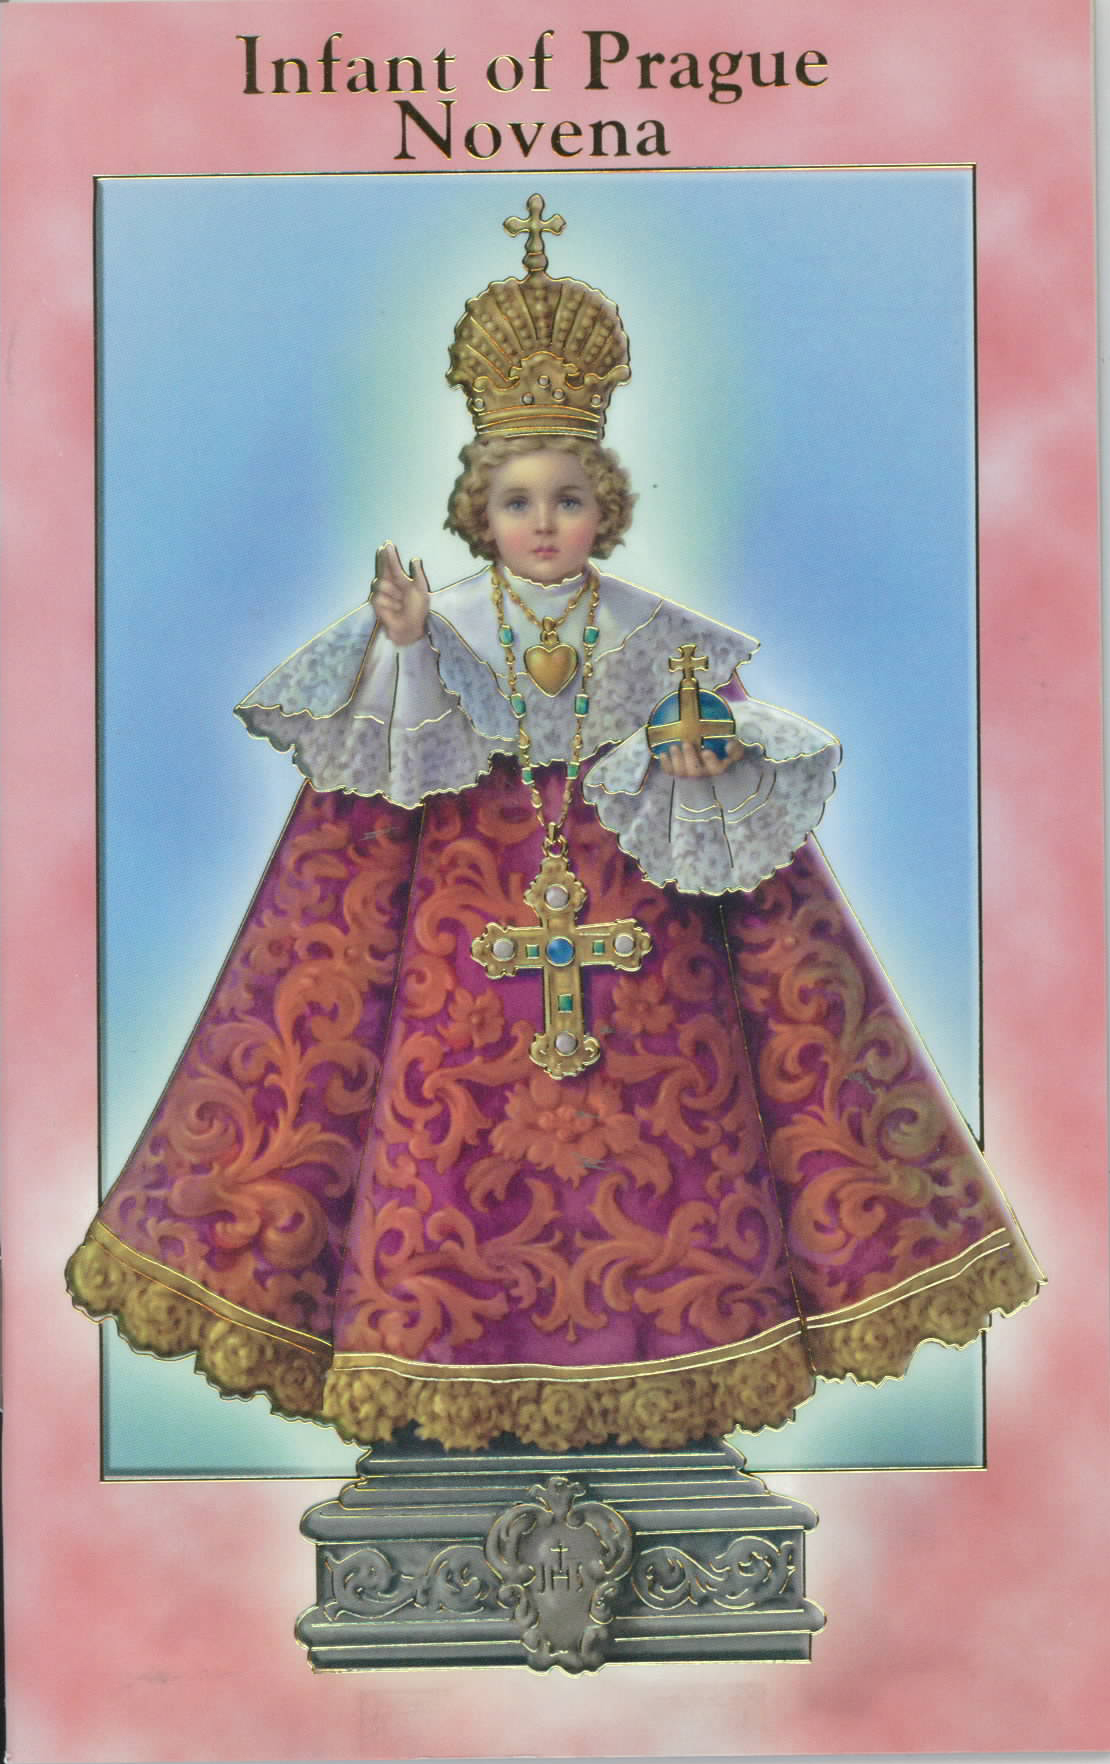 Infant of Prague Novena Prayer Book with Prayers 12-2432-107 is 3.75" x 5-7/8" and beautifully illustrated with 24 pages of Fratelli-Bonella Artwork and original text by Daniel A. Lord, S.J.